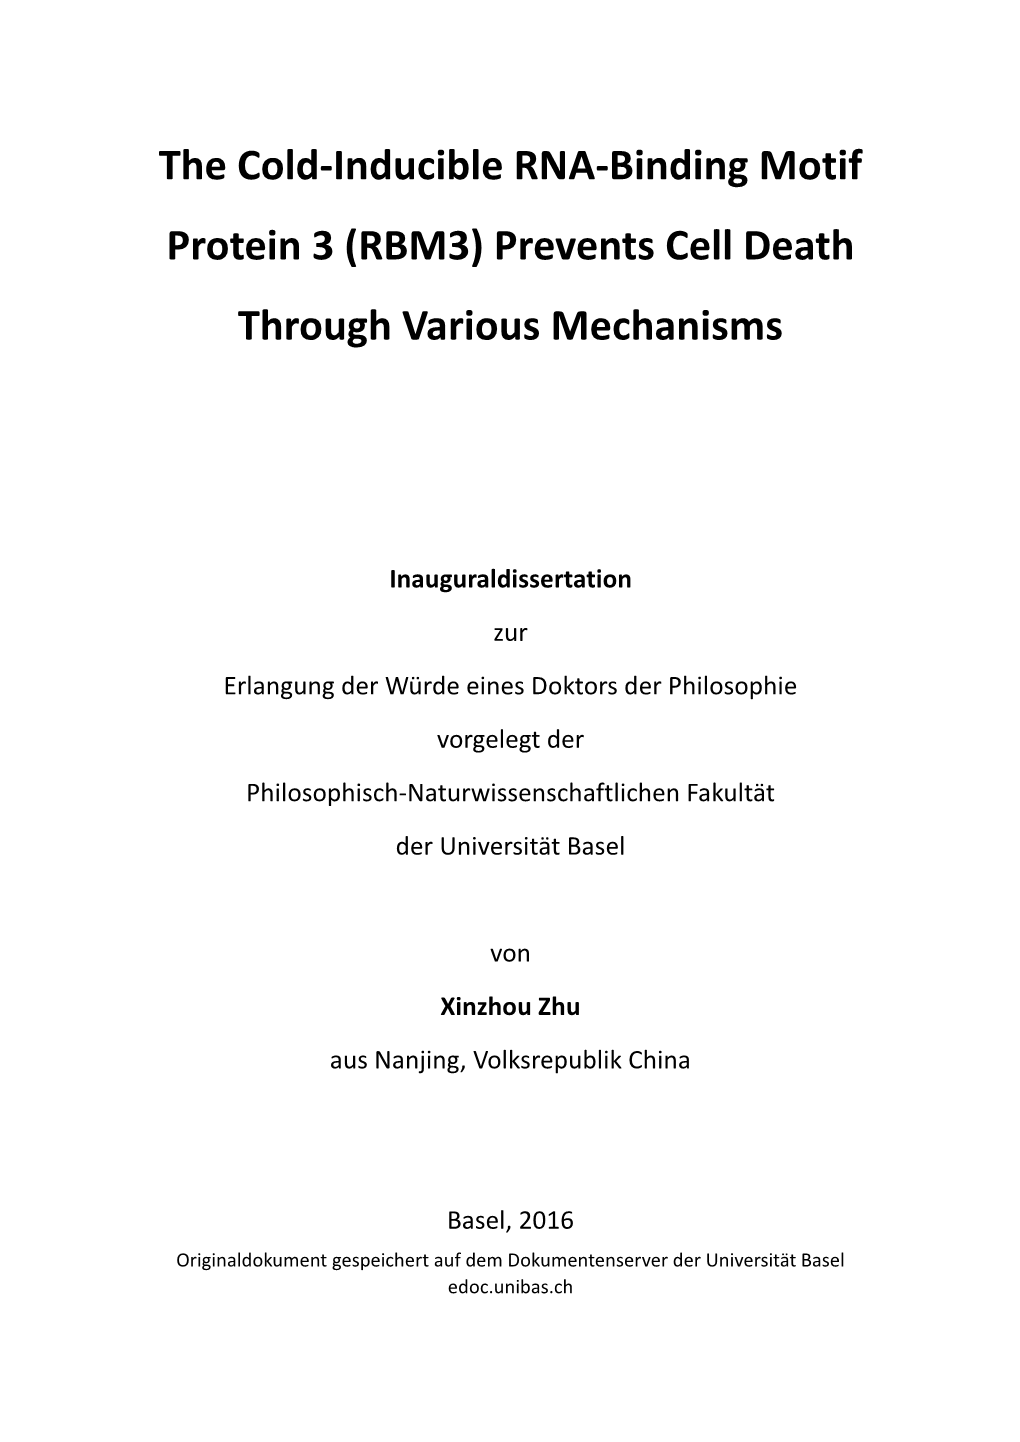 The Cold-Inducible RNA-Binding Motif Protein 3 (RBM3) Prevents Cell Death Through Various Mechanisms